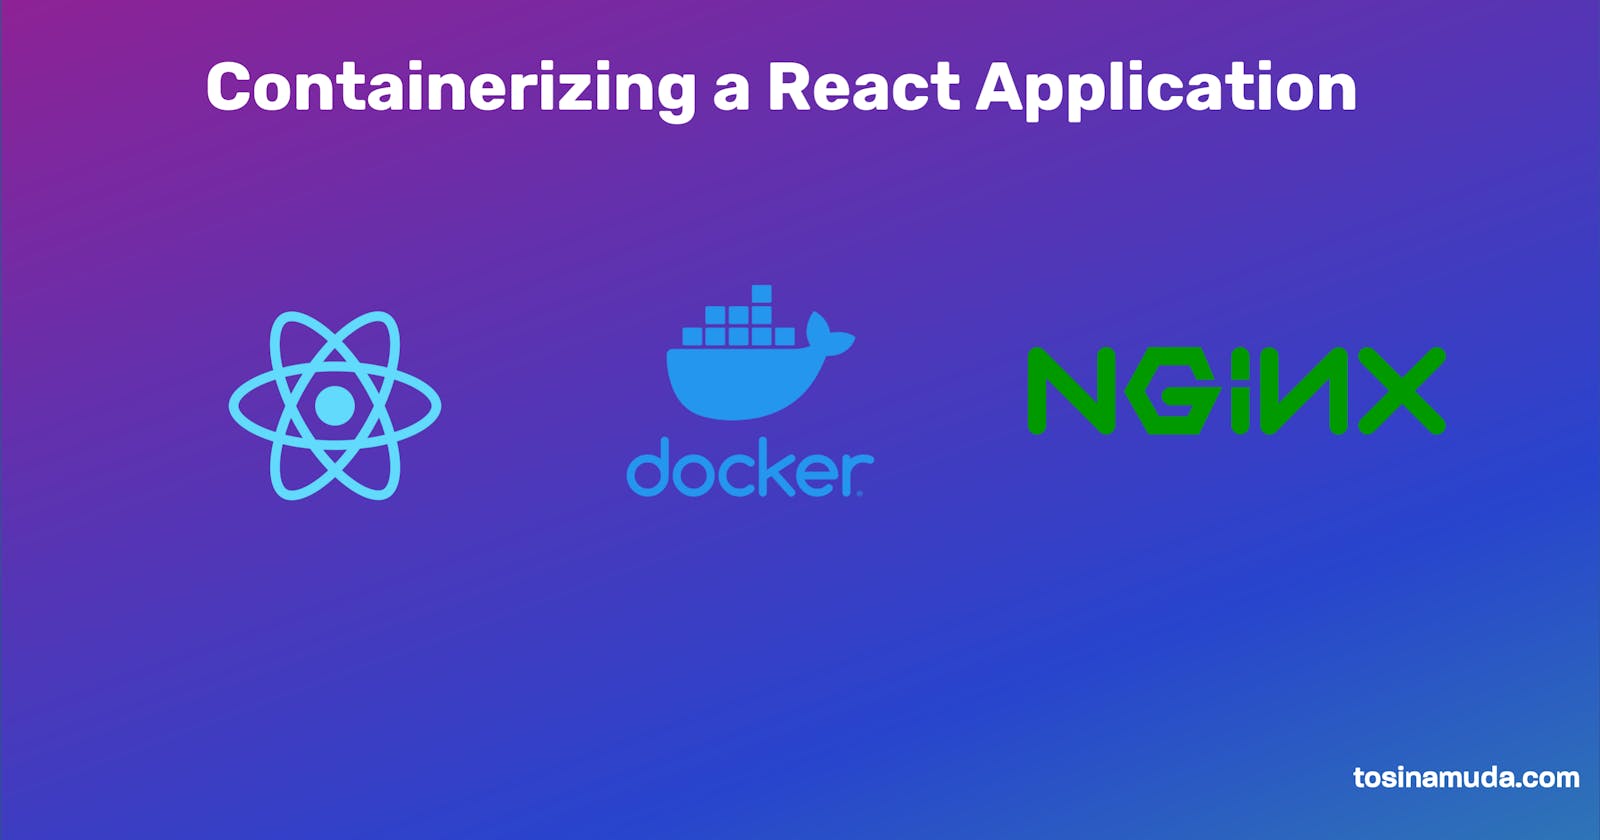 How to Containerize a React Application